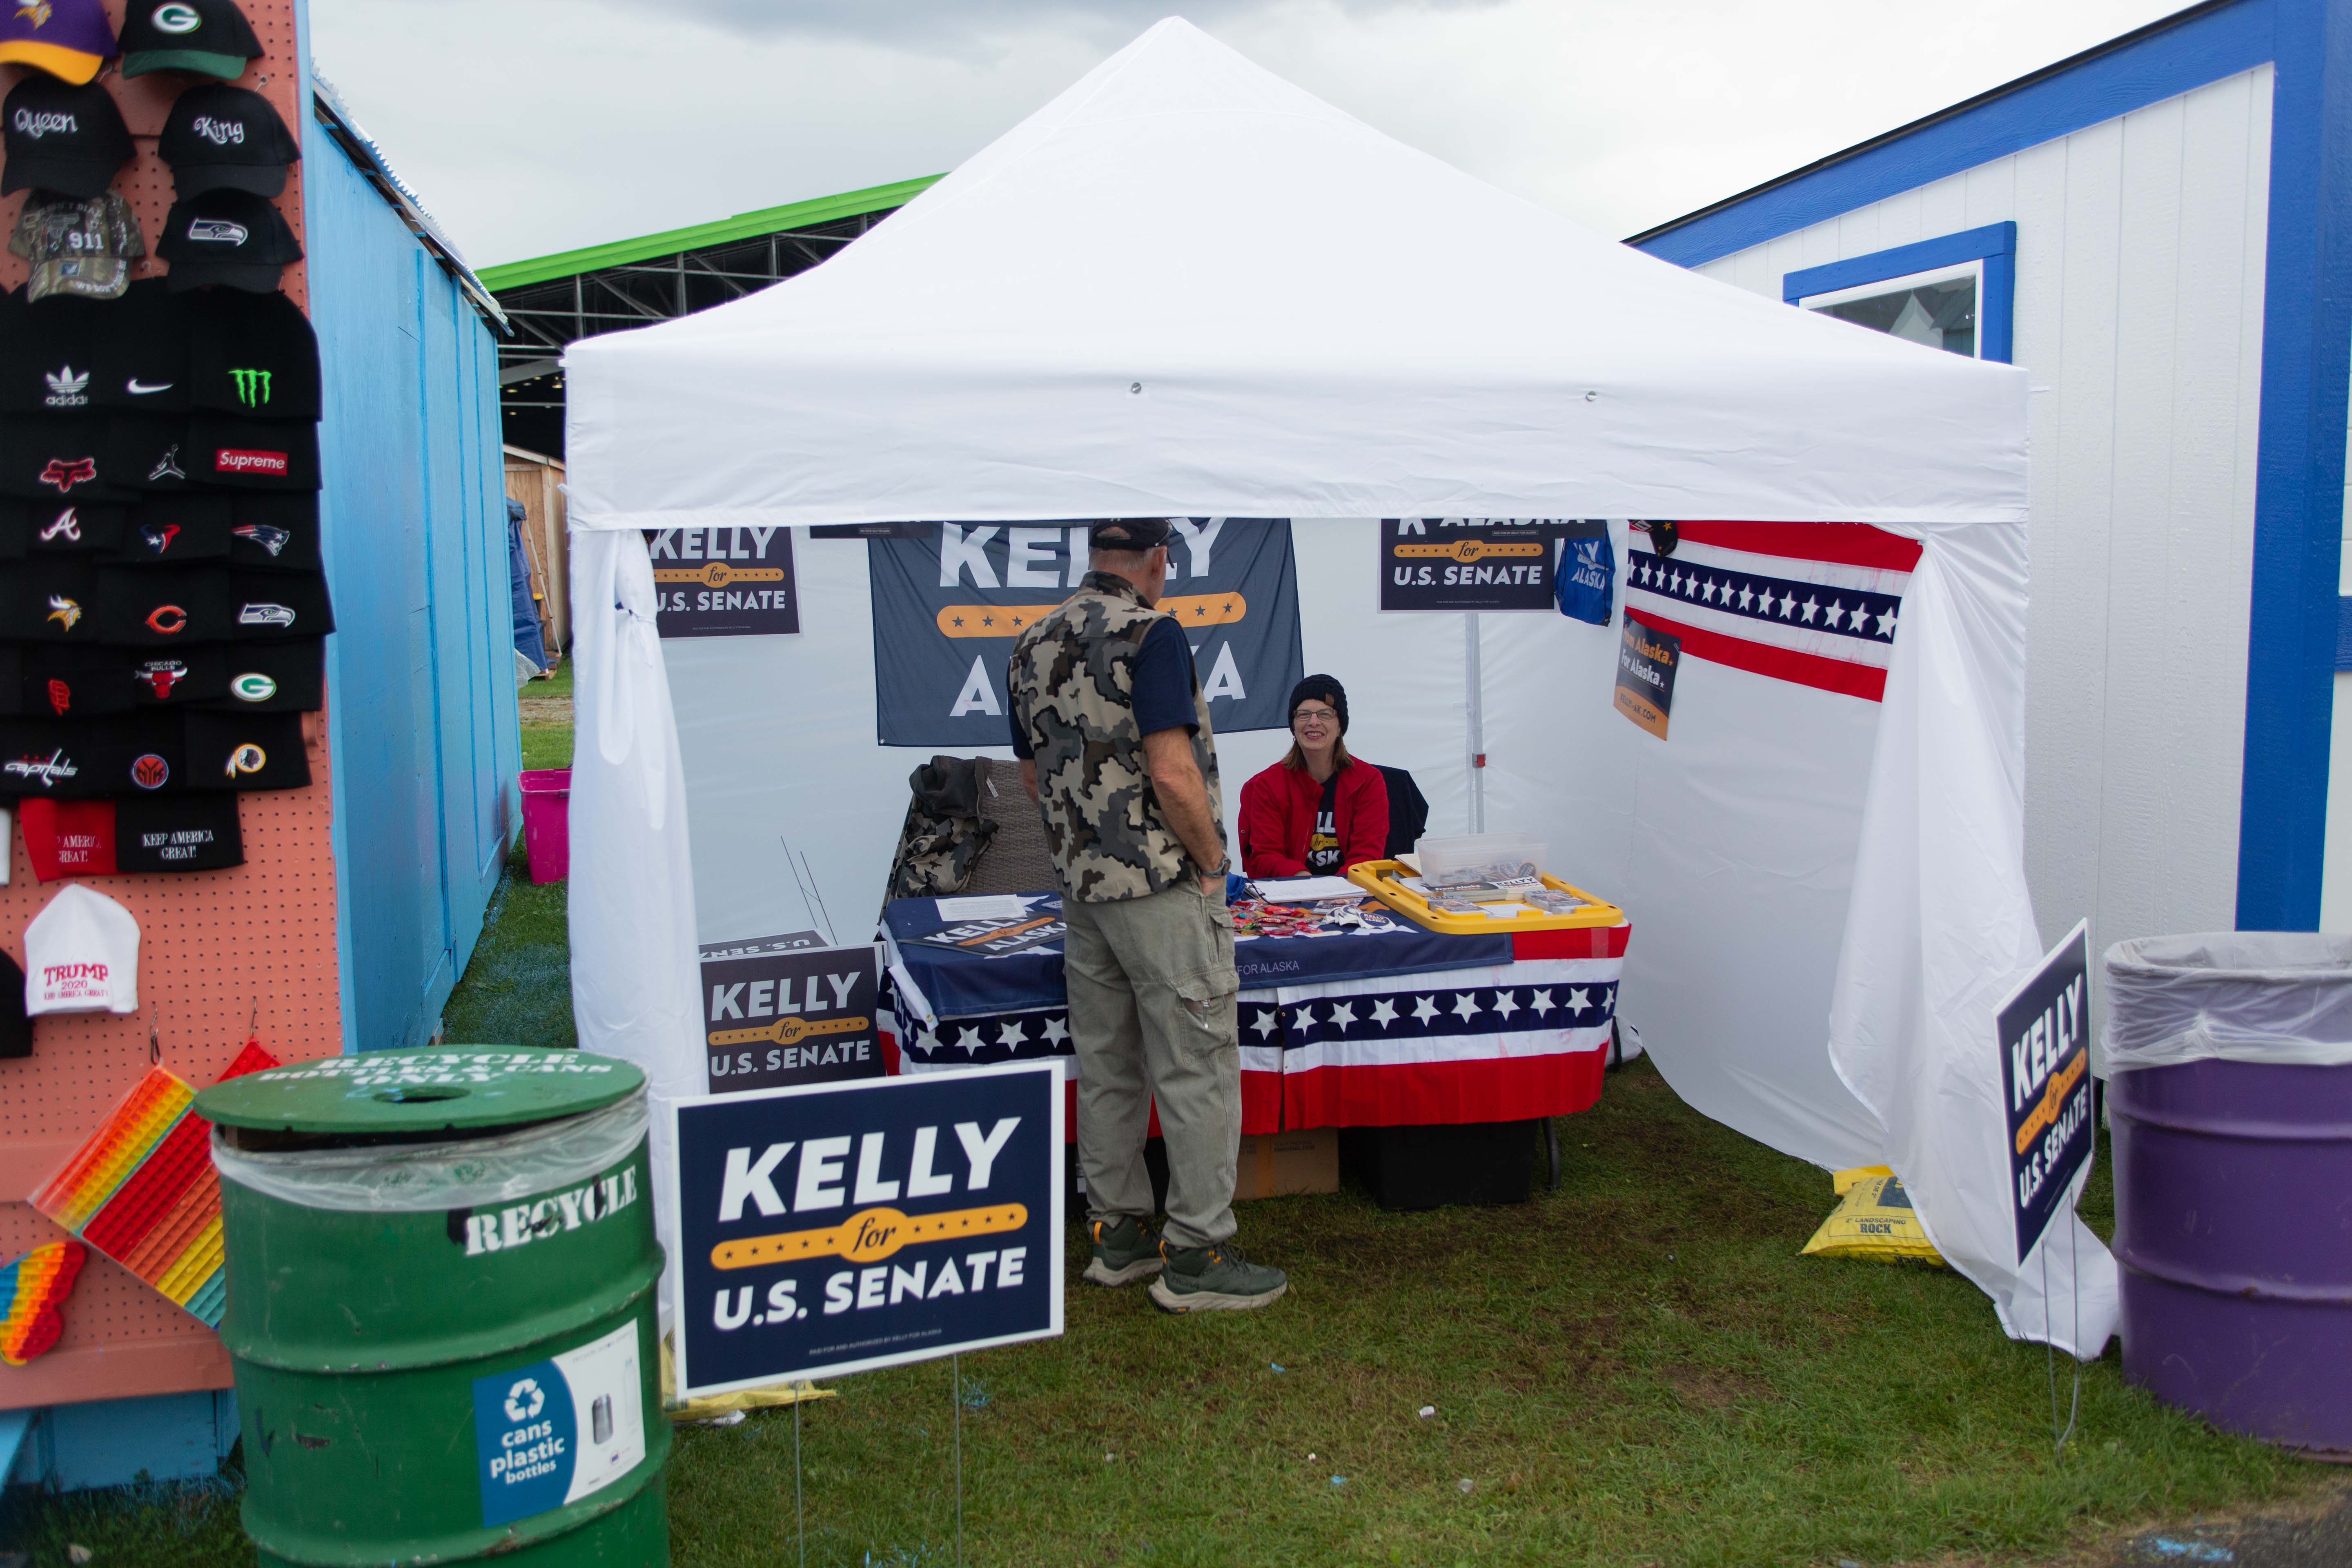 A tent with a man inside speaking with a woman, with signage around saying “Kelly for Senate”.